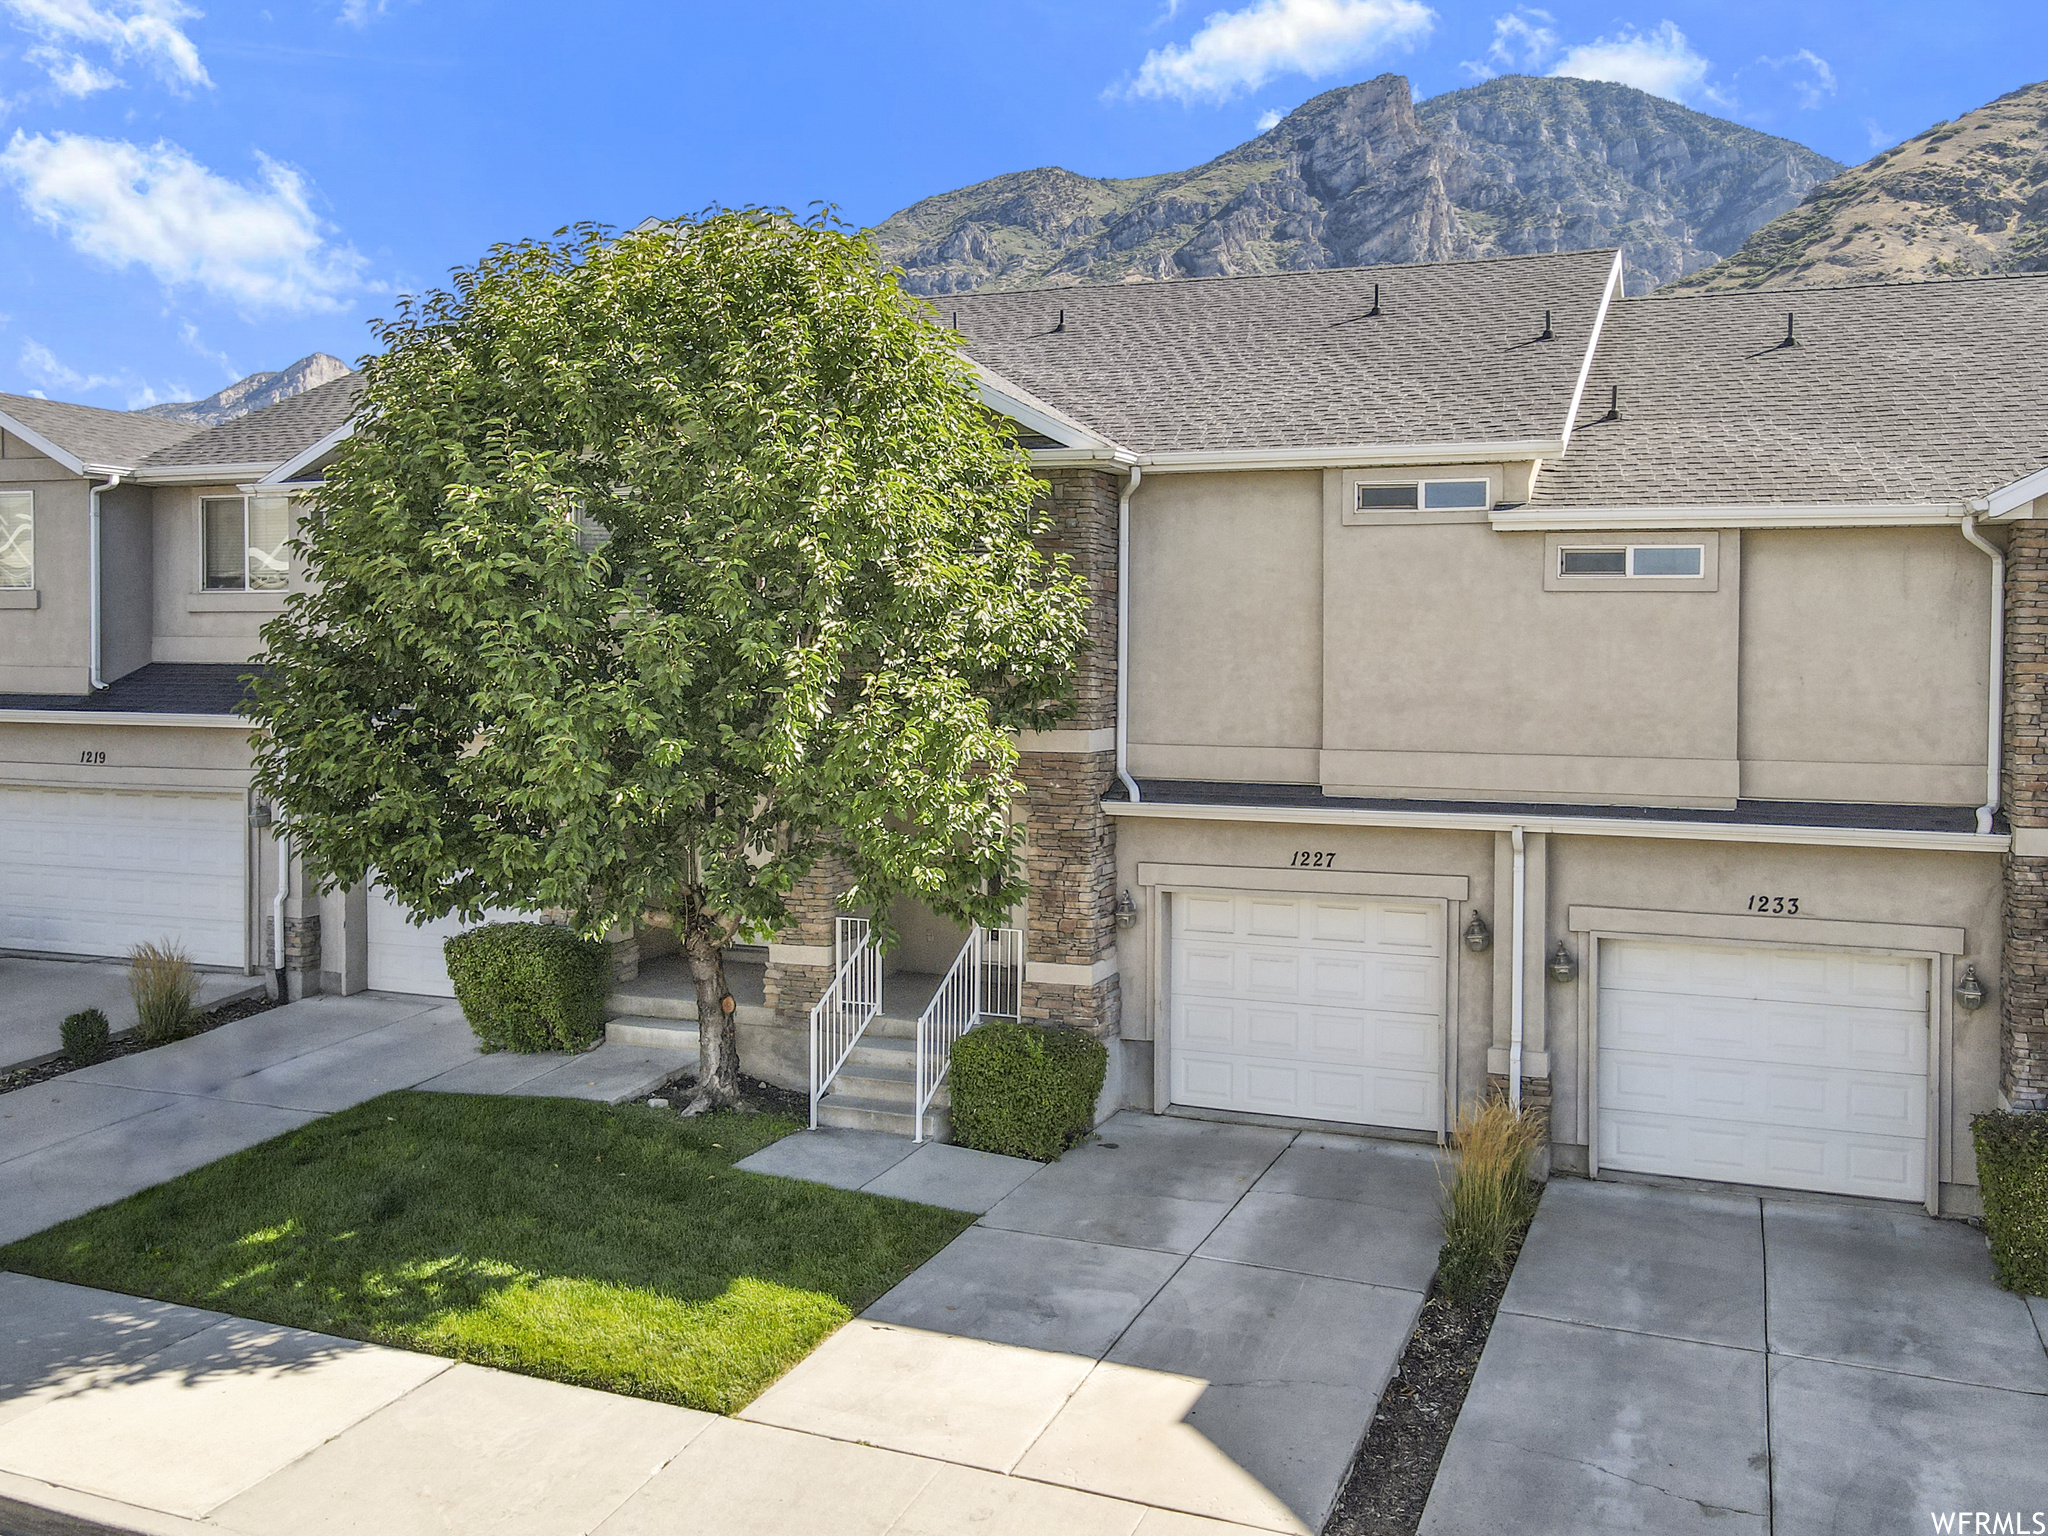 1227 S 1410 E, Provo, Utah 84606, 3 Bedrooms Bedrooms, 8 Rooms Rooms,2 BathroomsBathrooms,Residential,For sale,1410,1964615